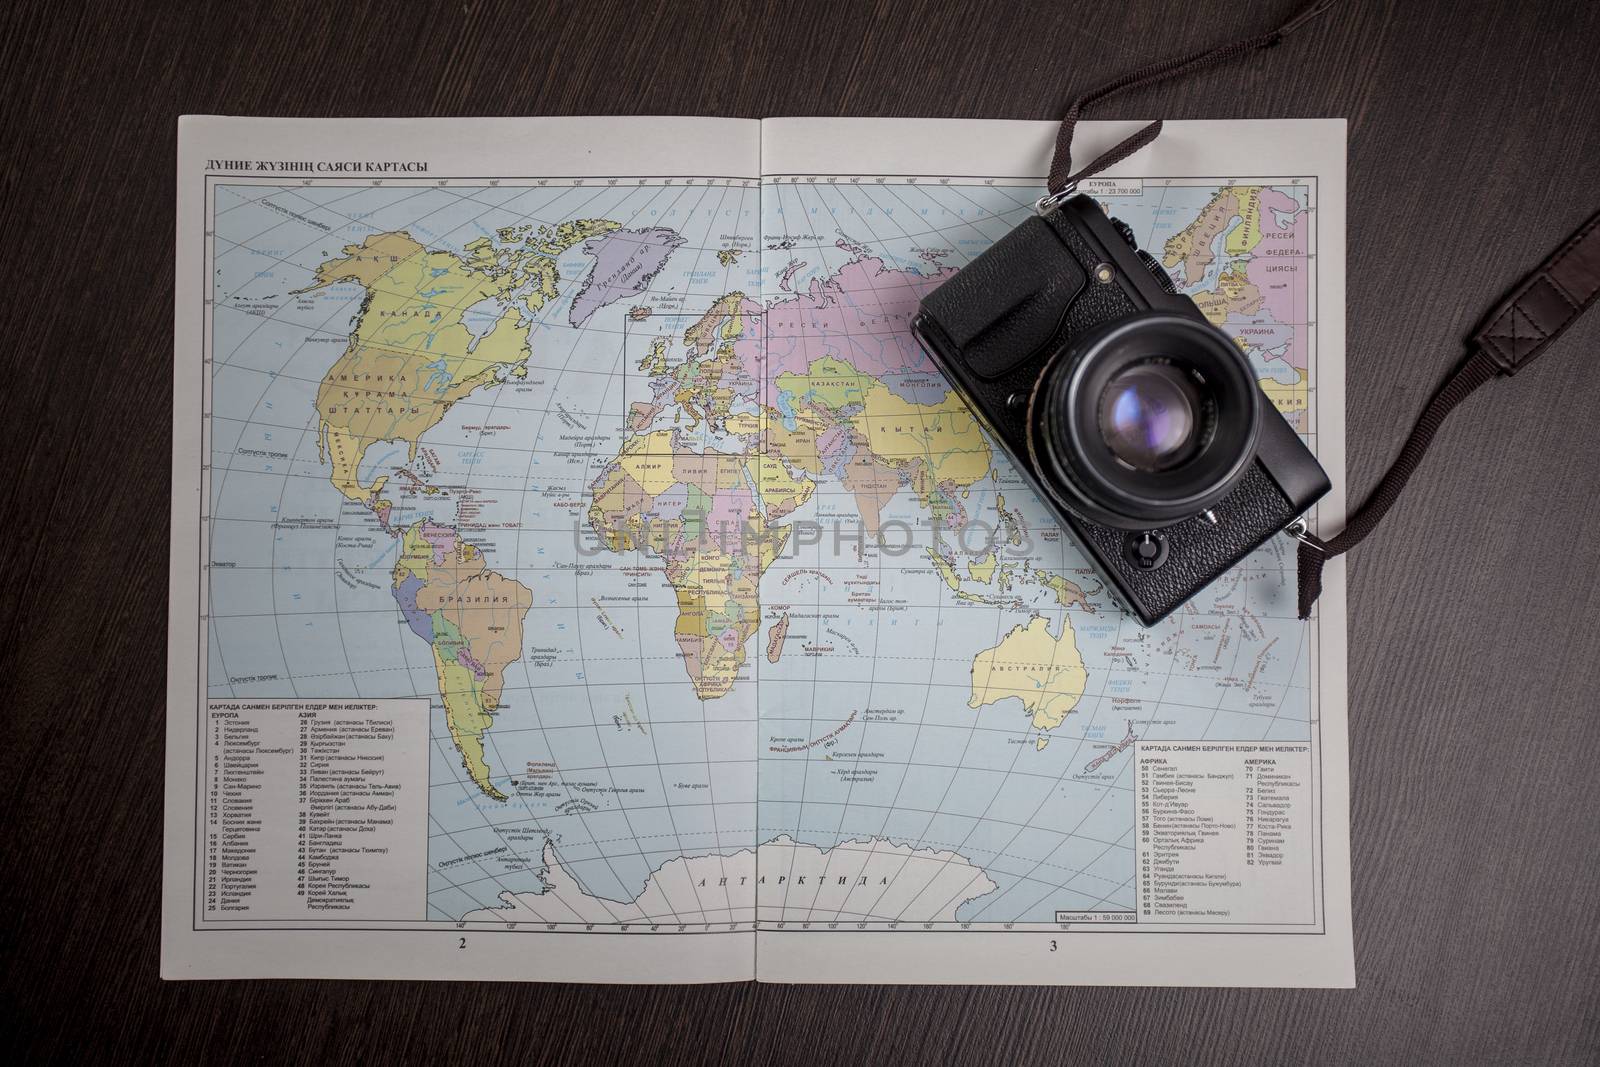 The camera lies on the world map